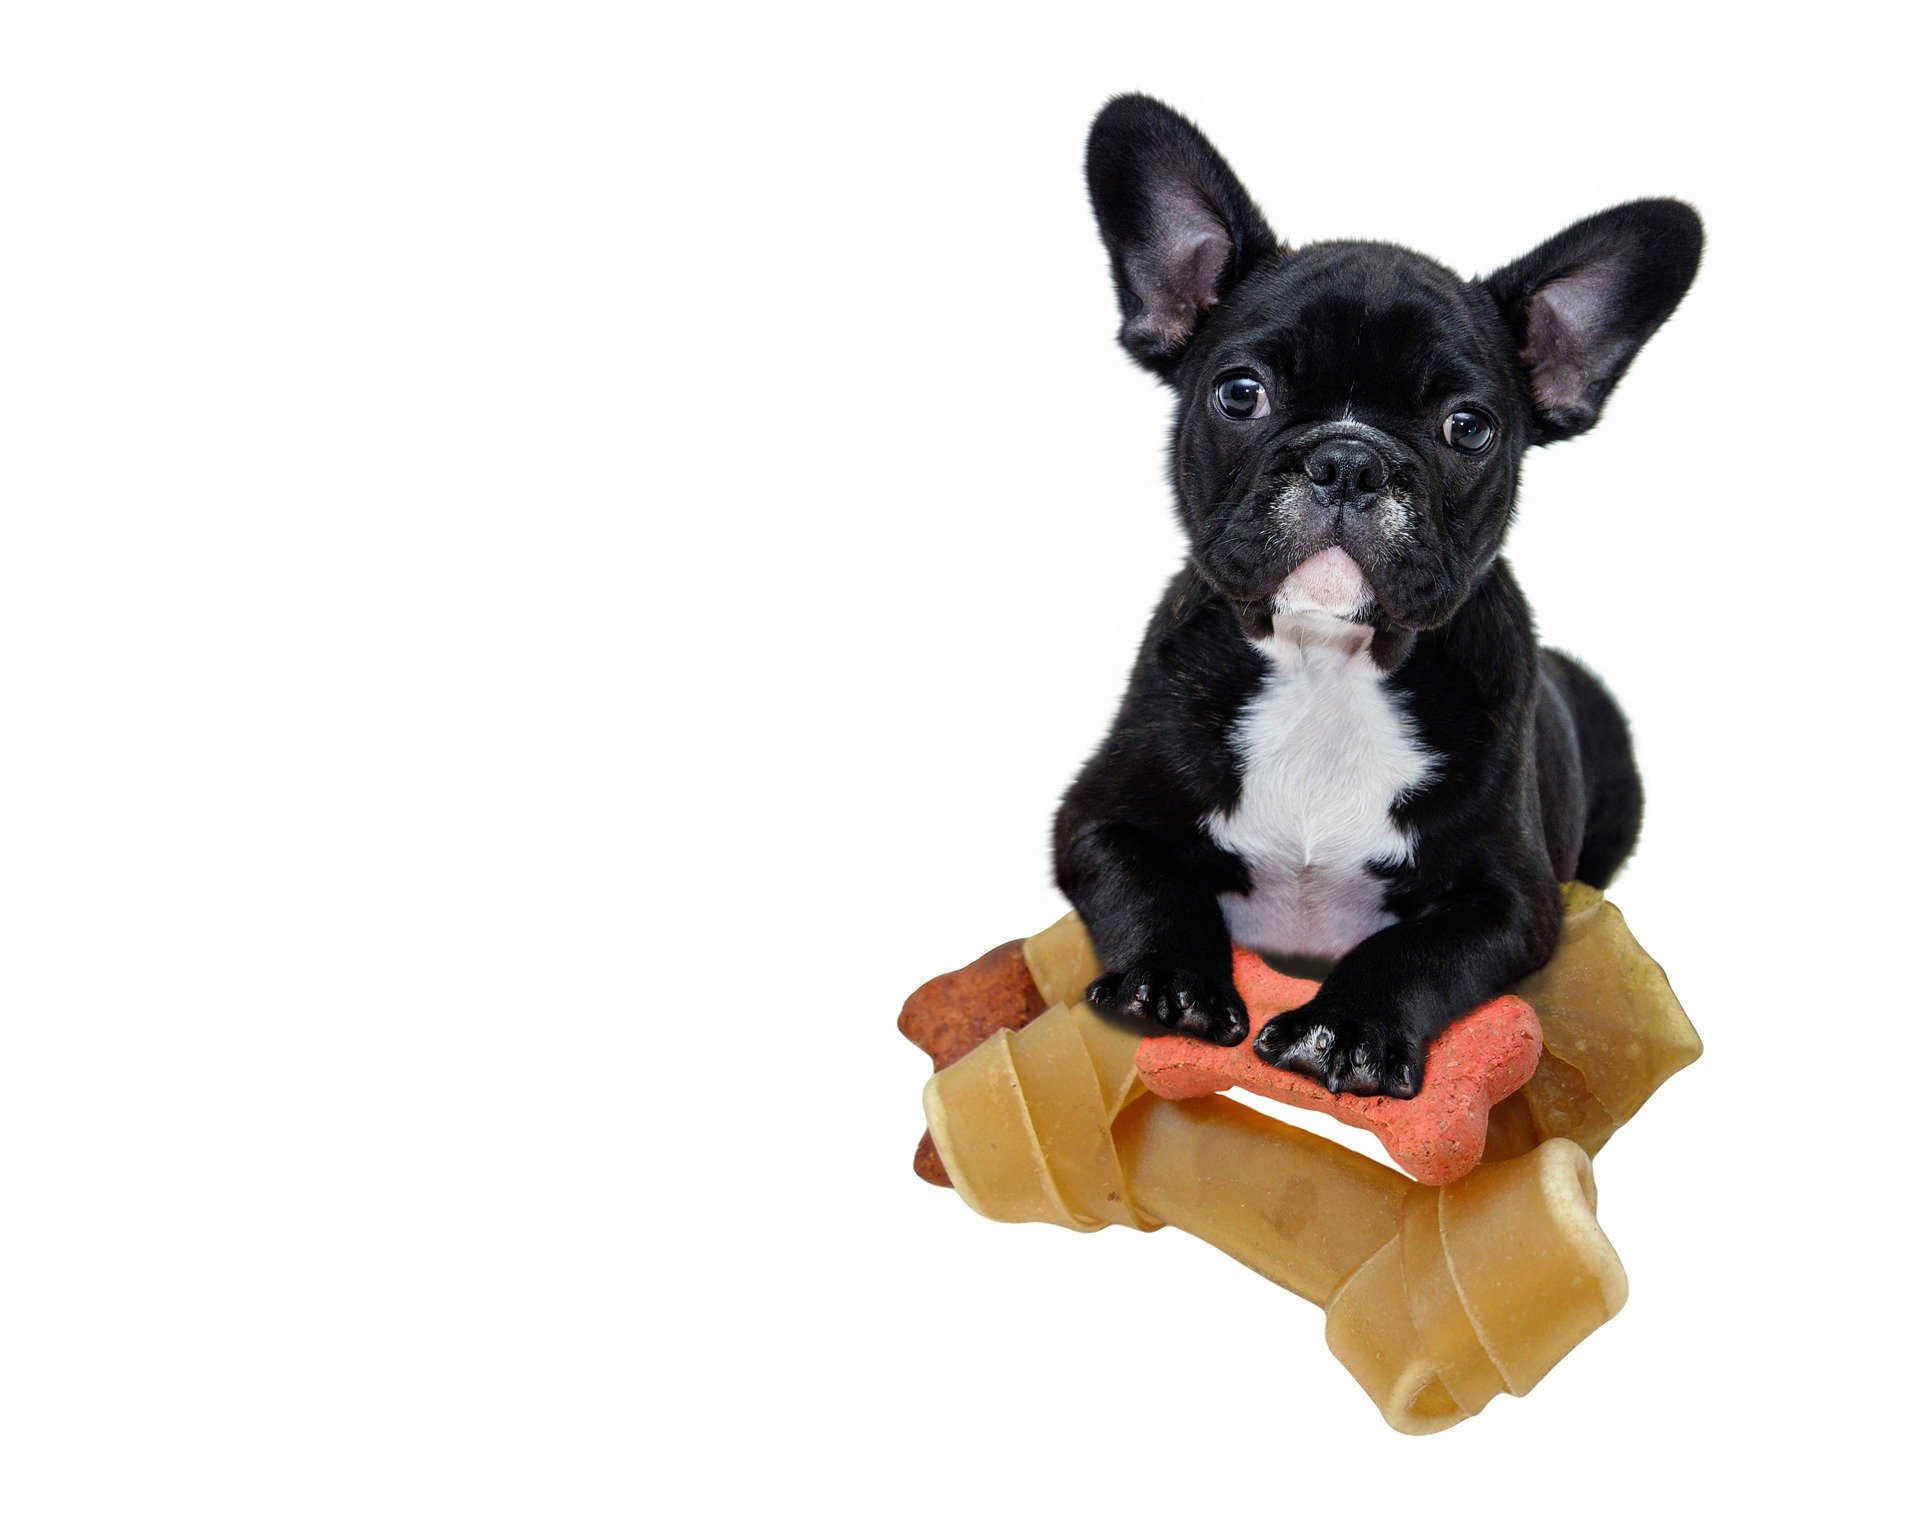 are dog treats regulated by the fda ups codes